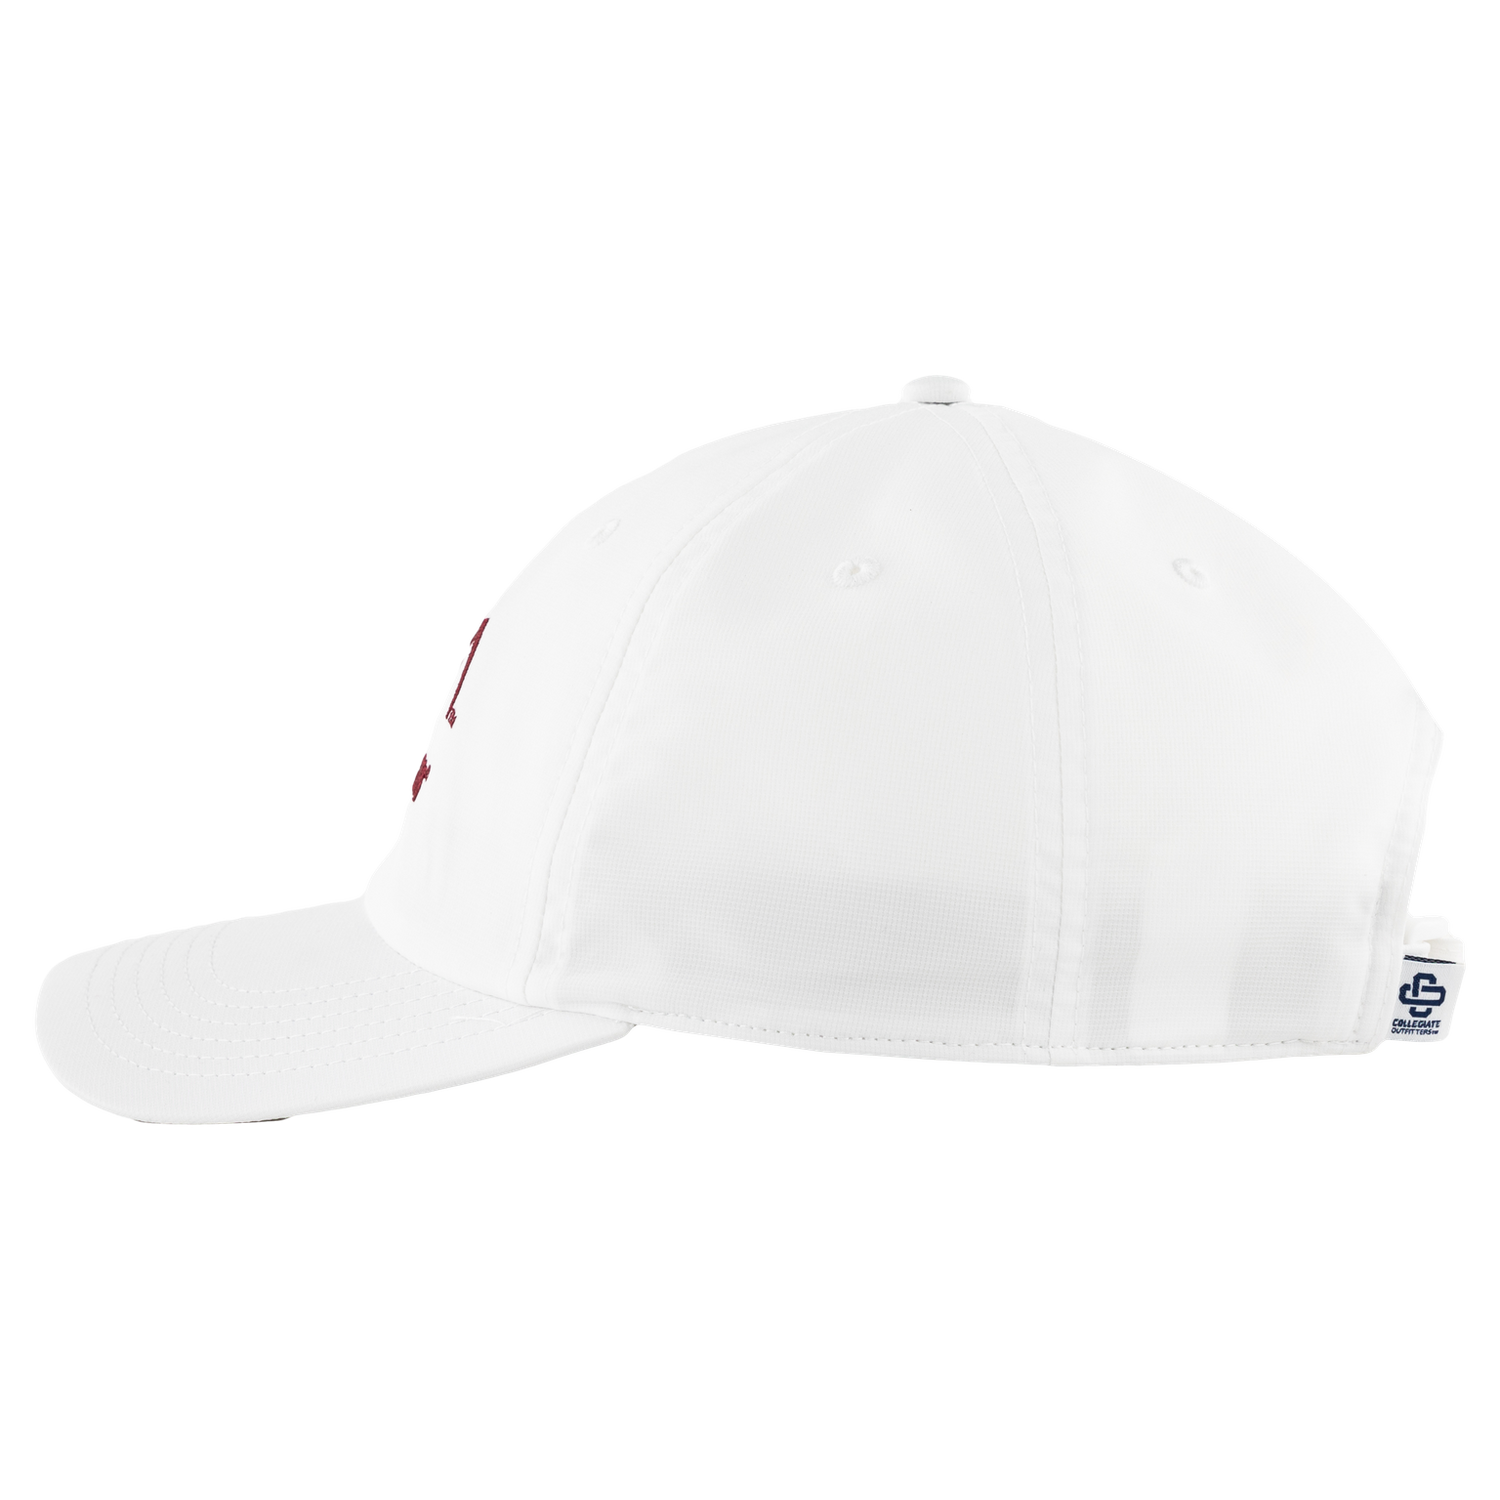 Saw 'Em Off Collegiate Outfitters Embroidered Hat